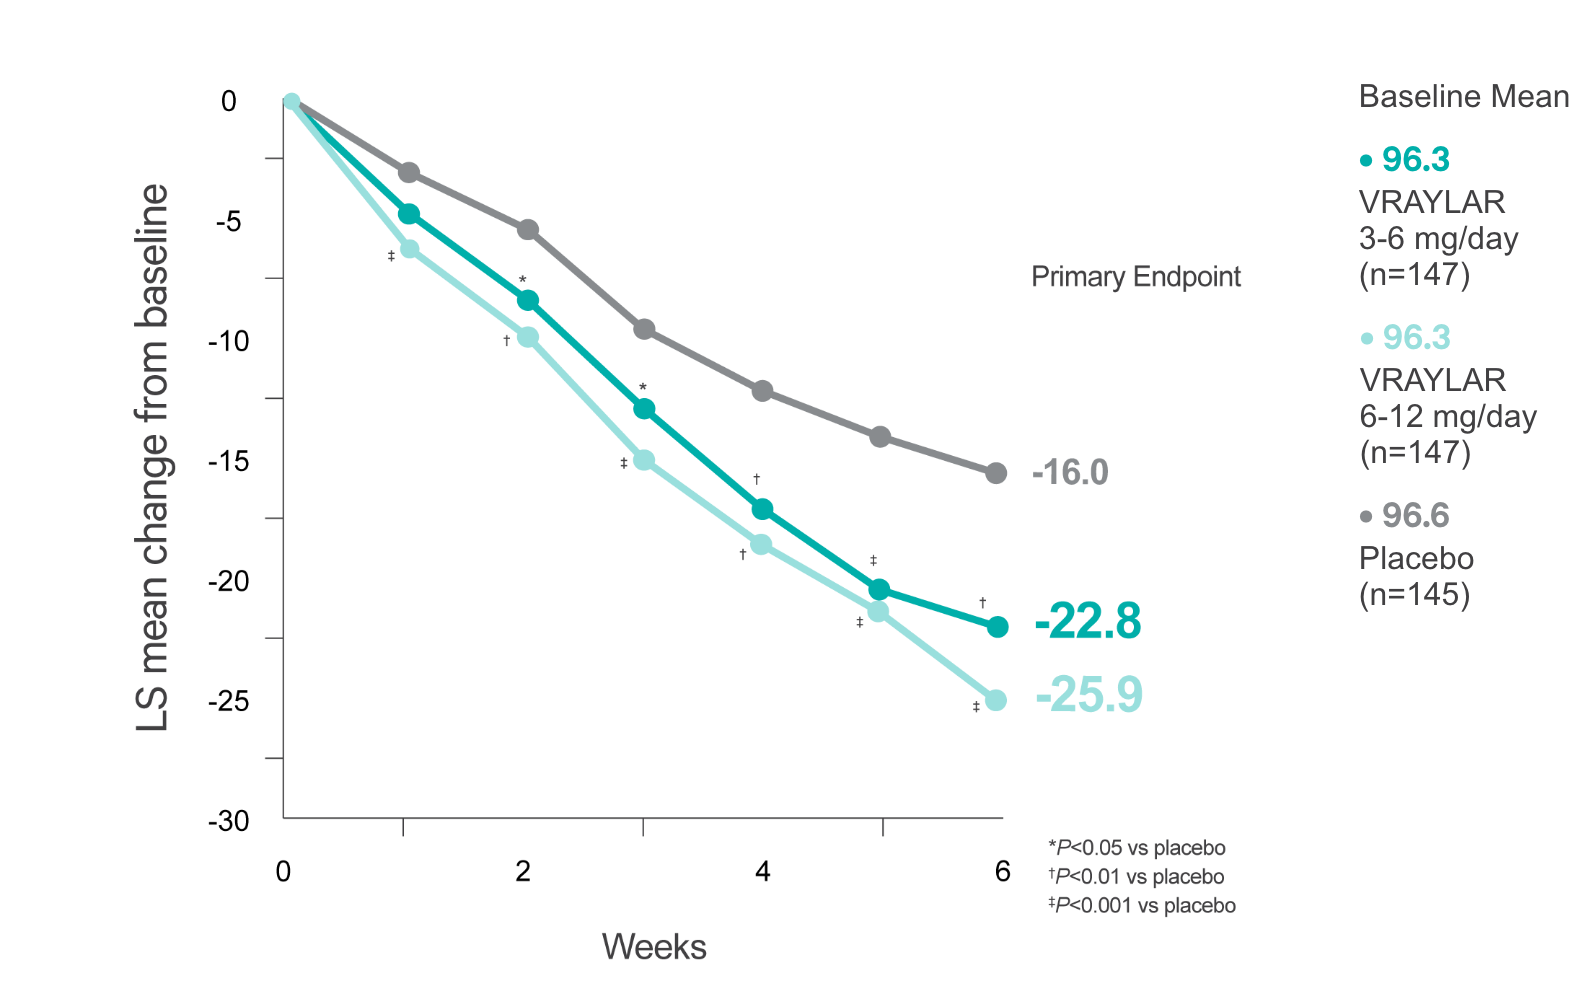 Graph showing change in PANSS total score in VRAYLAR vs placebo for schizophrenia in study 3.